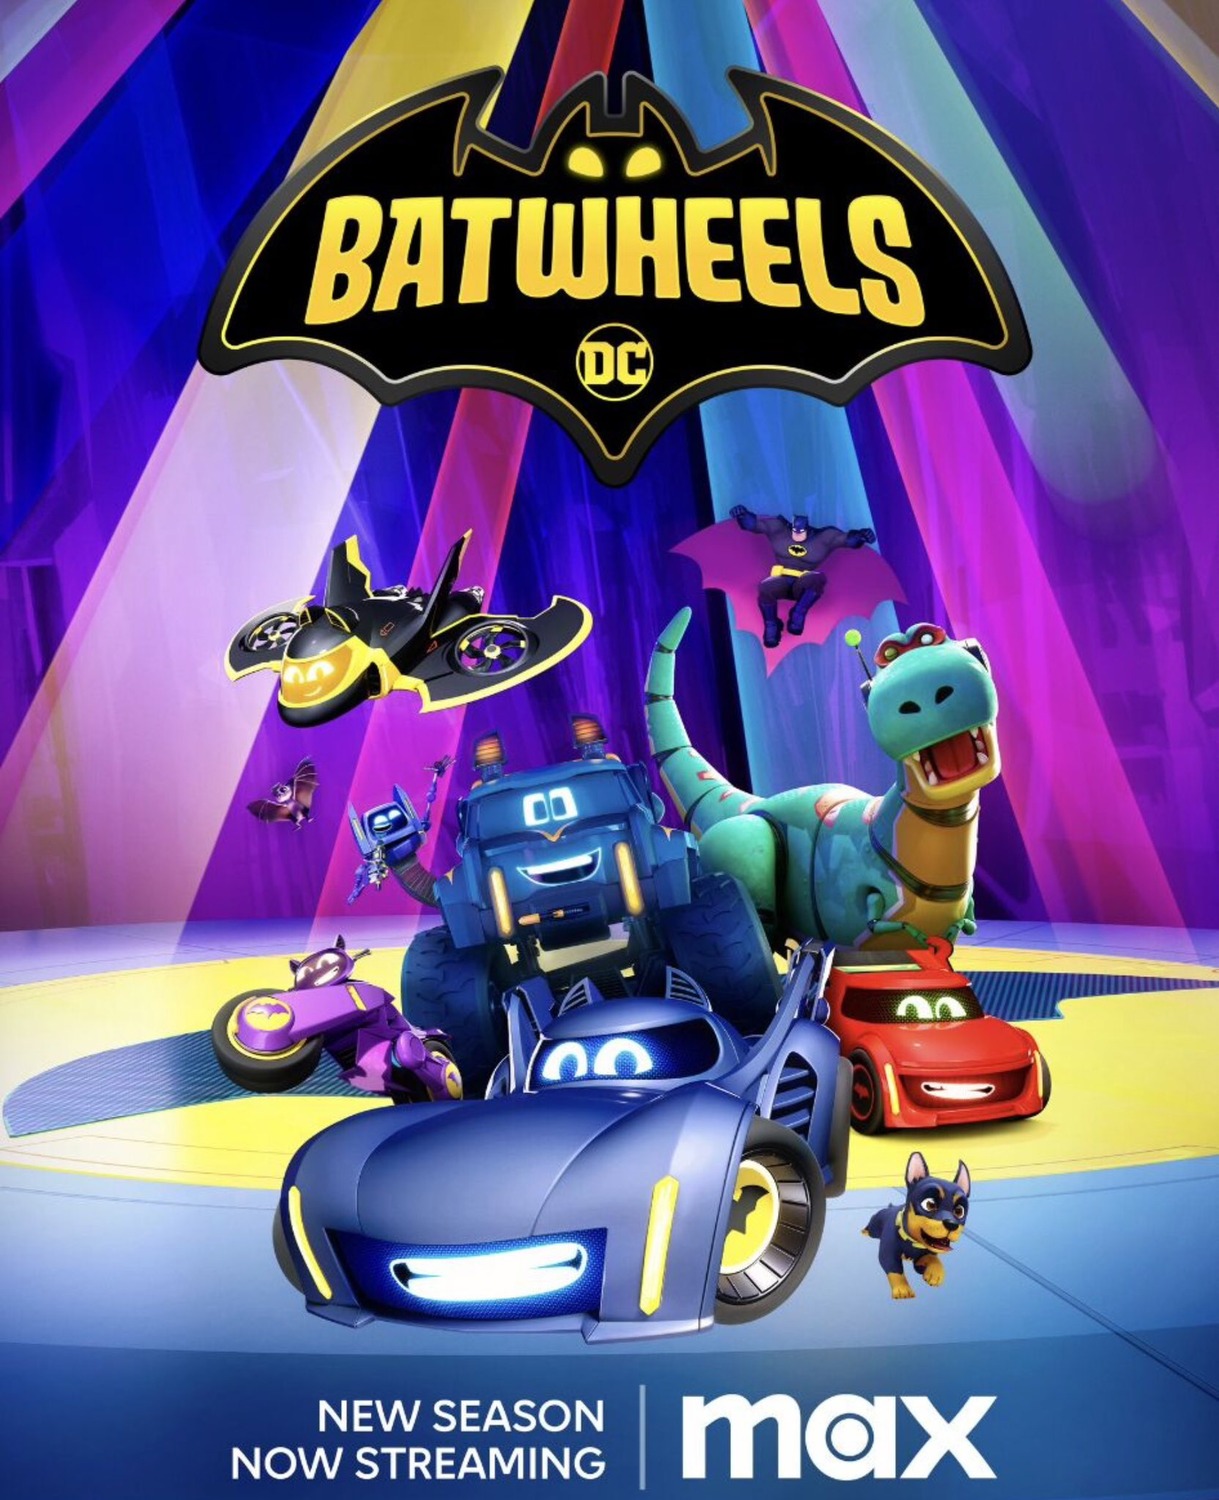 Extra Large TV Poster Image for Batwheels (#2 of 3)